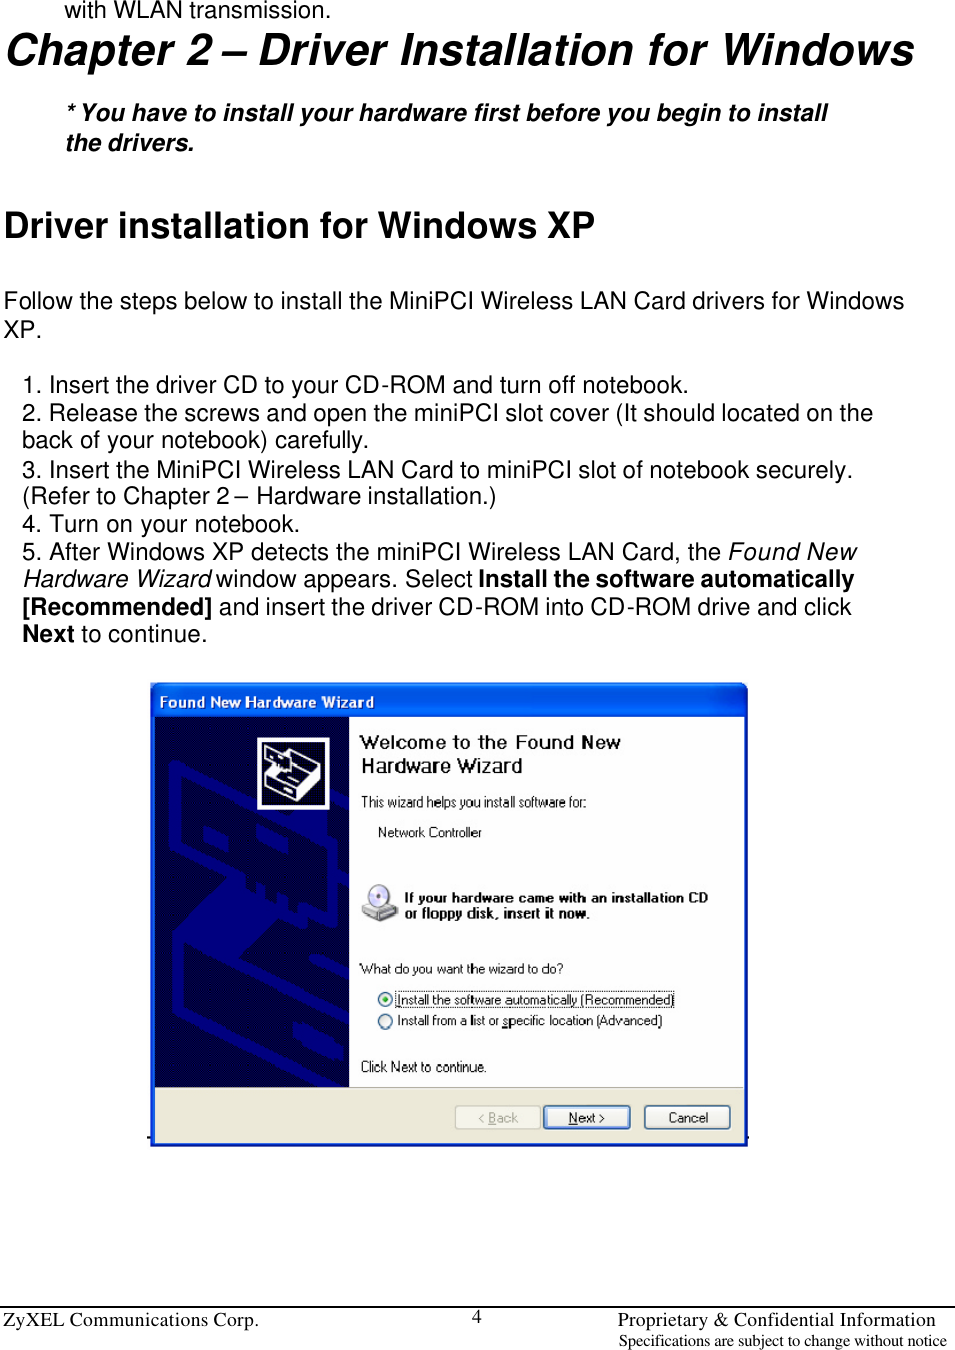  ZyXEL Communications Corp.                                                                       Proprietary &amp; Confidential Information                                                                                                                           Specifications are subject to change without notice 4  with WLAN transmission. Chapter 2 – Driver Installation for Windows  * You have to install your hardware first before you begin to install the drivers.   Driver installation for Windows XP  Follow the steps below to install the MiniPCI Wireless LAN Card drivers for Windows XP.  1. Insert the driver CD to your CD-ROM and turn off notebook. 2. Release the screws and open the miniPCI slot cover (It should located on the back of your notebook) carefully. 3. Insert the MiniPCI Wireless LAN Card to miniPCI slot of notebook securely. (Refer to Chapter 2 – Hardware installation.) 4. Turn on your notebook. 5. After Windows XP detects the miniPCI Wireless LAN Card, the Found New Hardware Wizard window appears. Select Install the software automatically [Recommended] and insert the driver CD-ROM into CD-ROM drive and click Next to continue.        